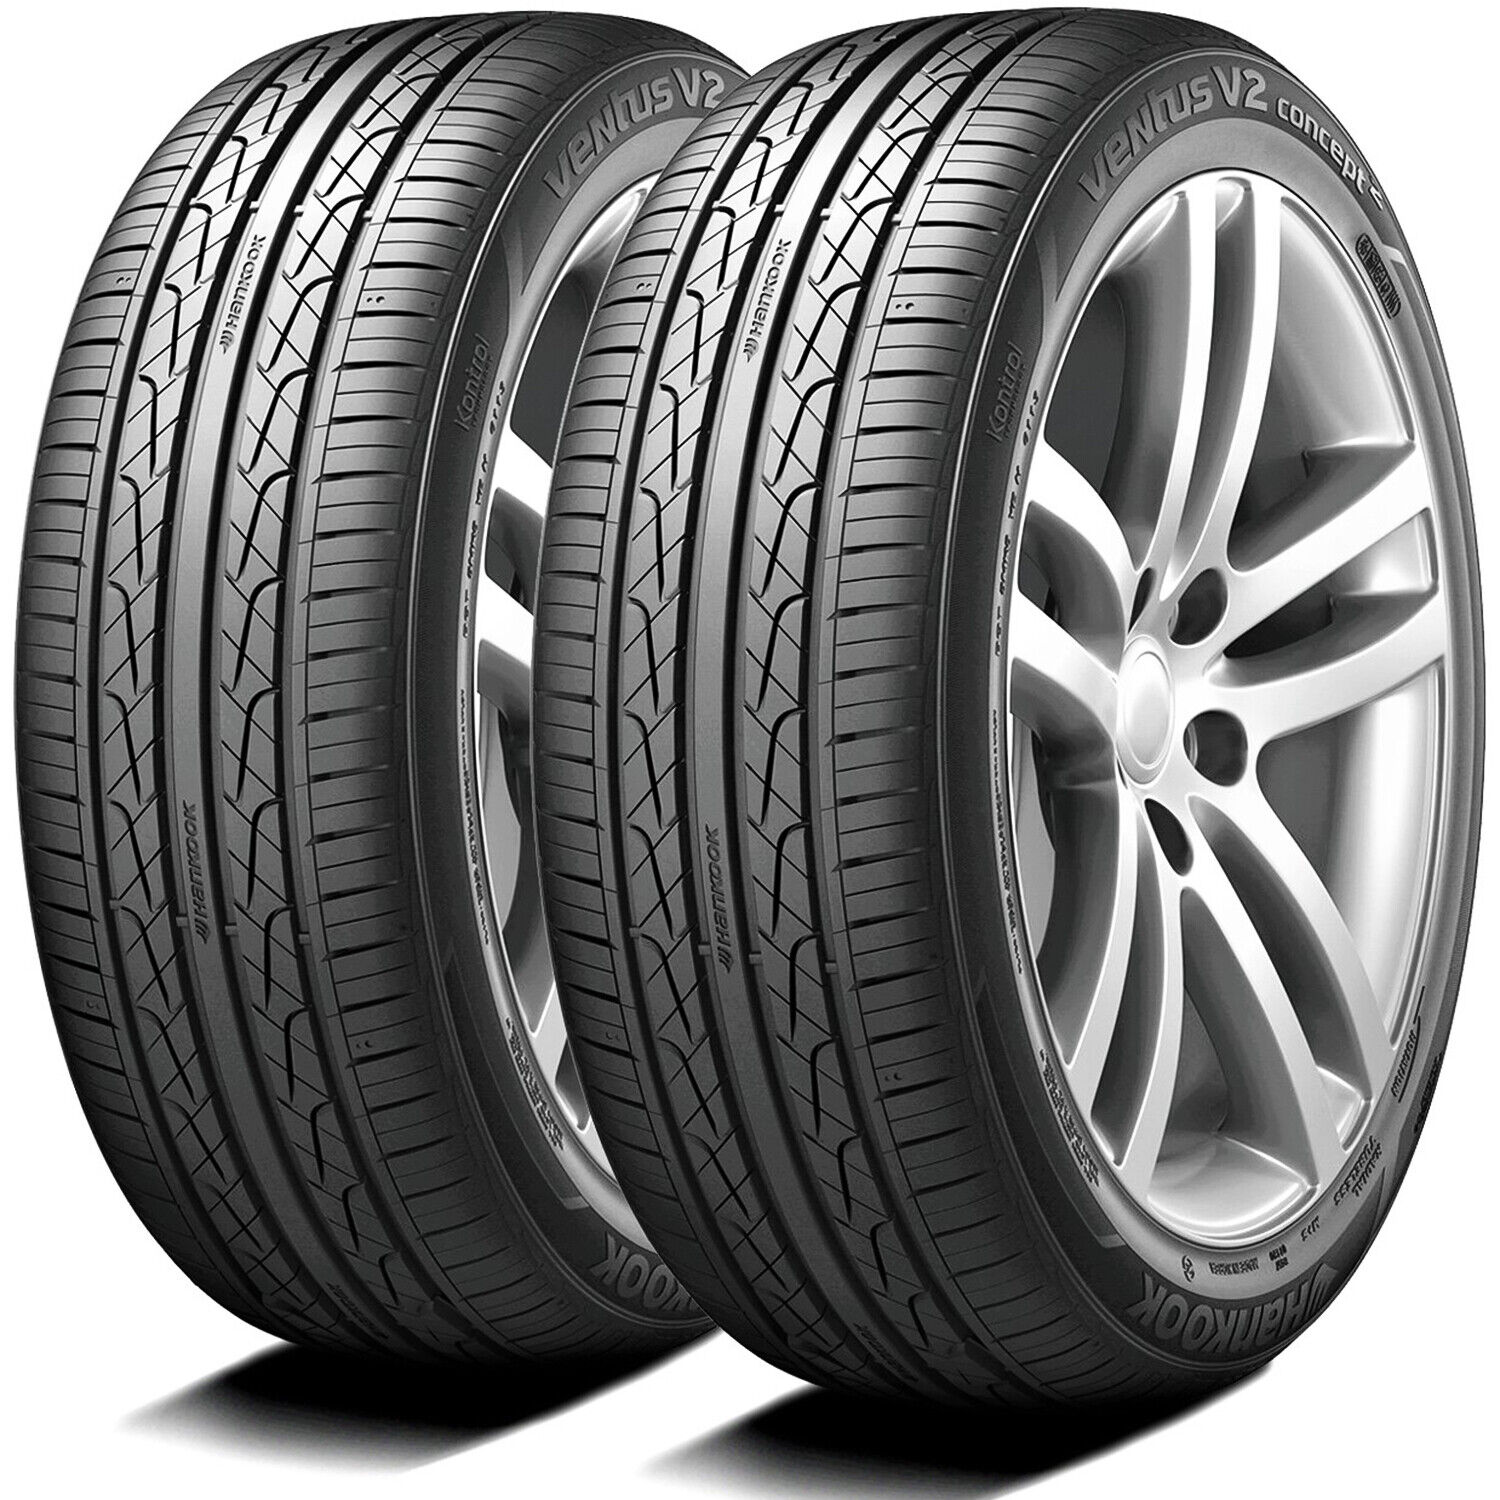 2 Tires Hankook Ventus V2 Concept2 225/40R18 92W XL AS Performance A/S